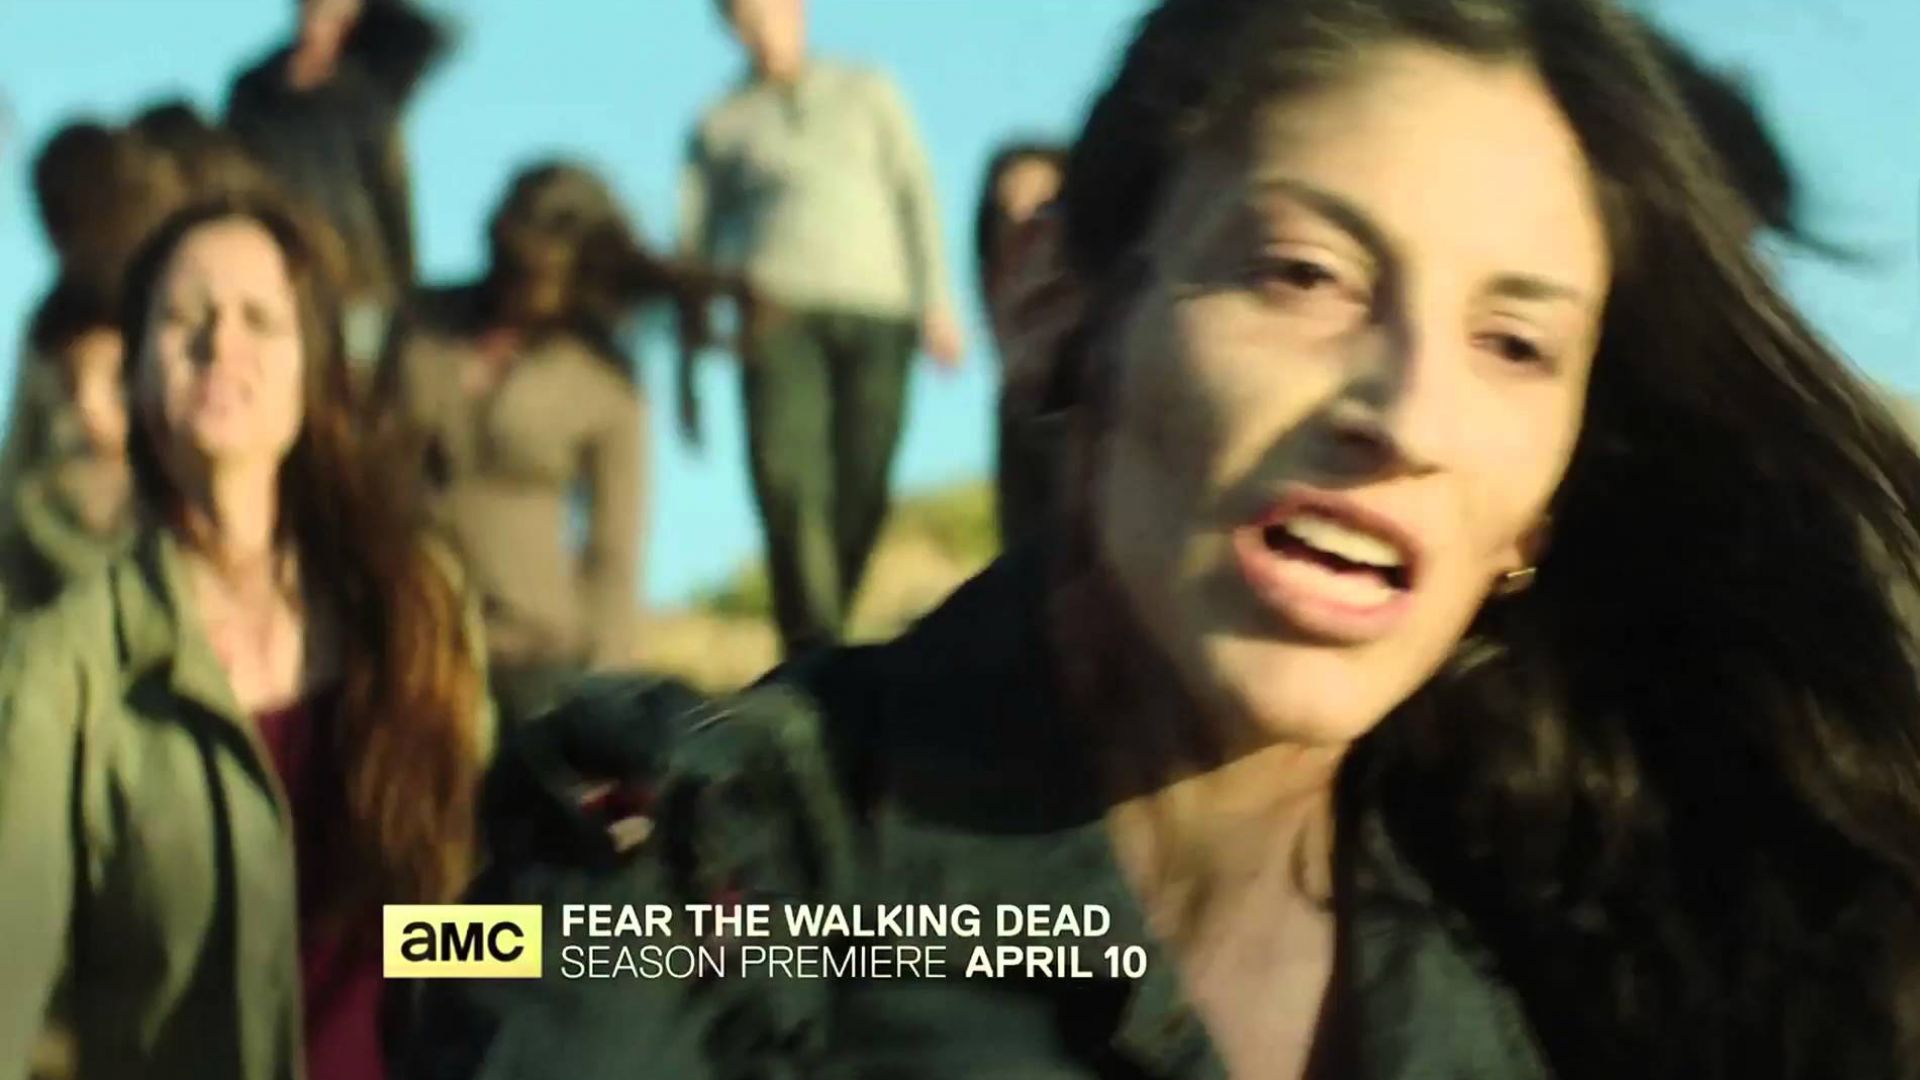 "The abyss stares back" - Fear the Walking Dead Season 2 Tra